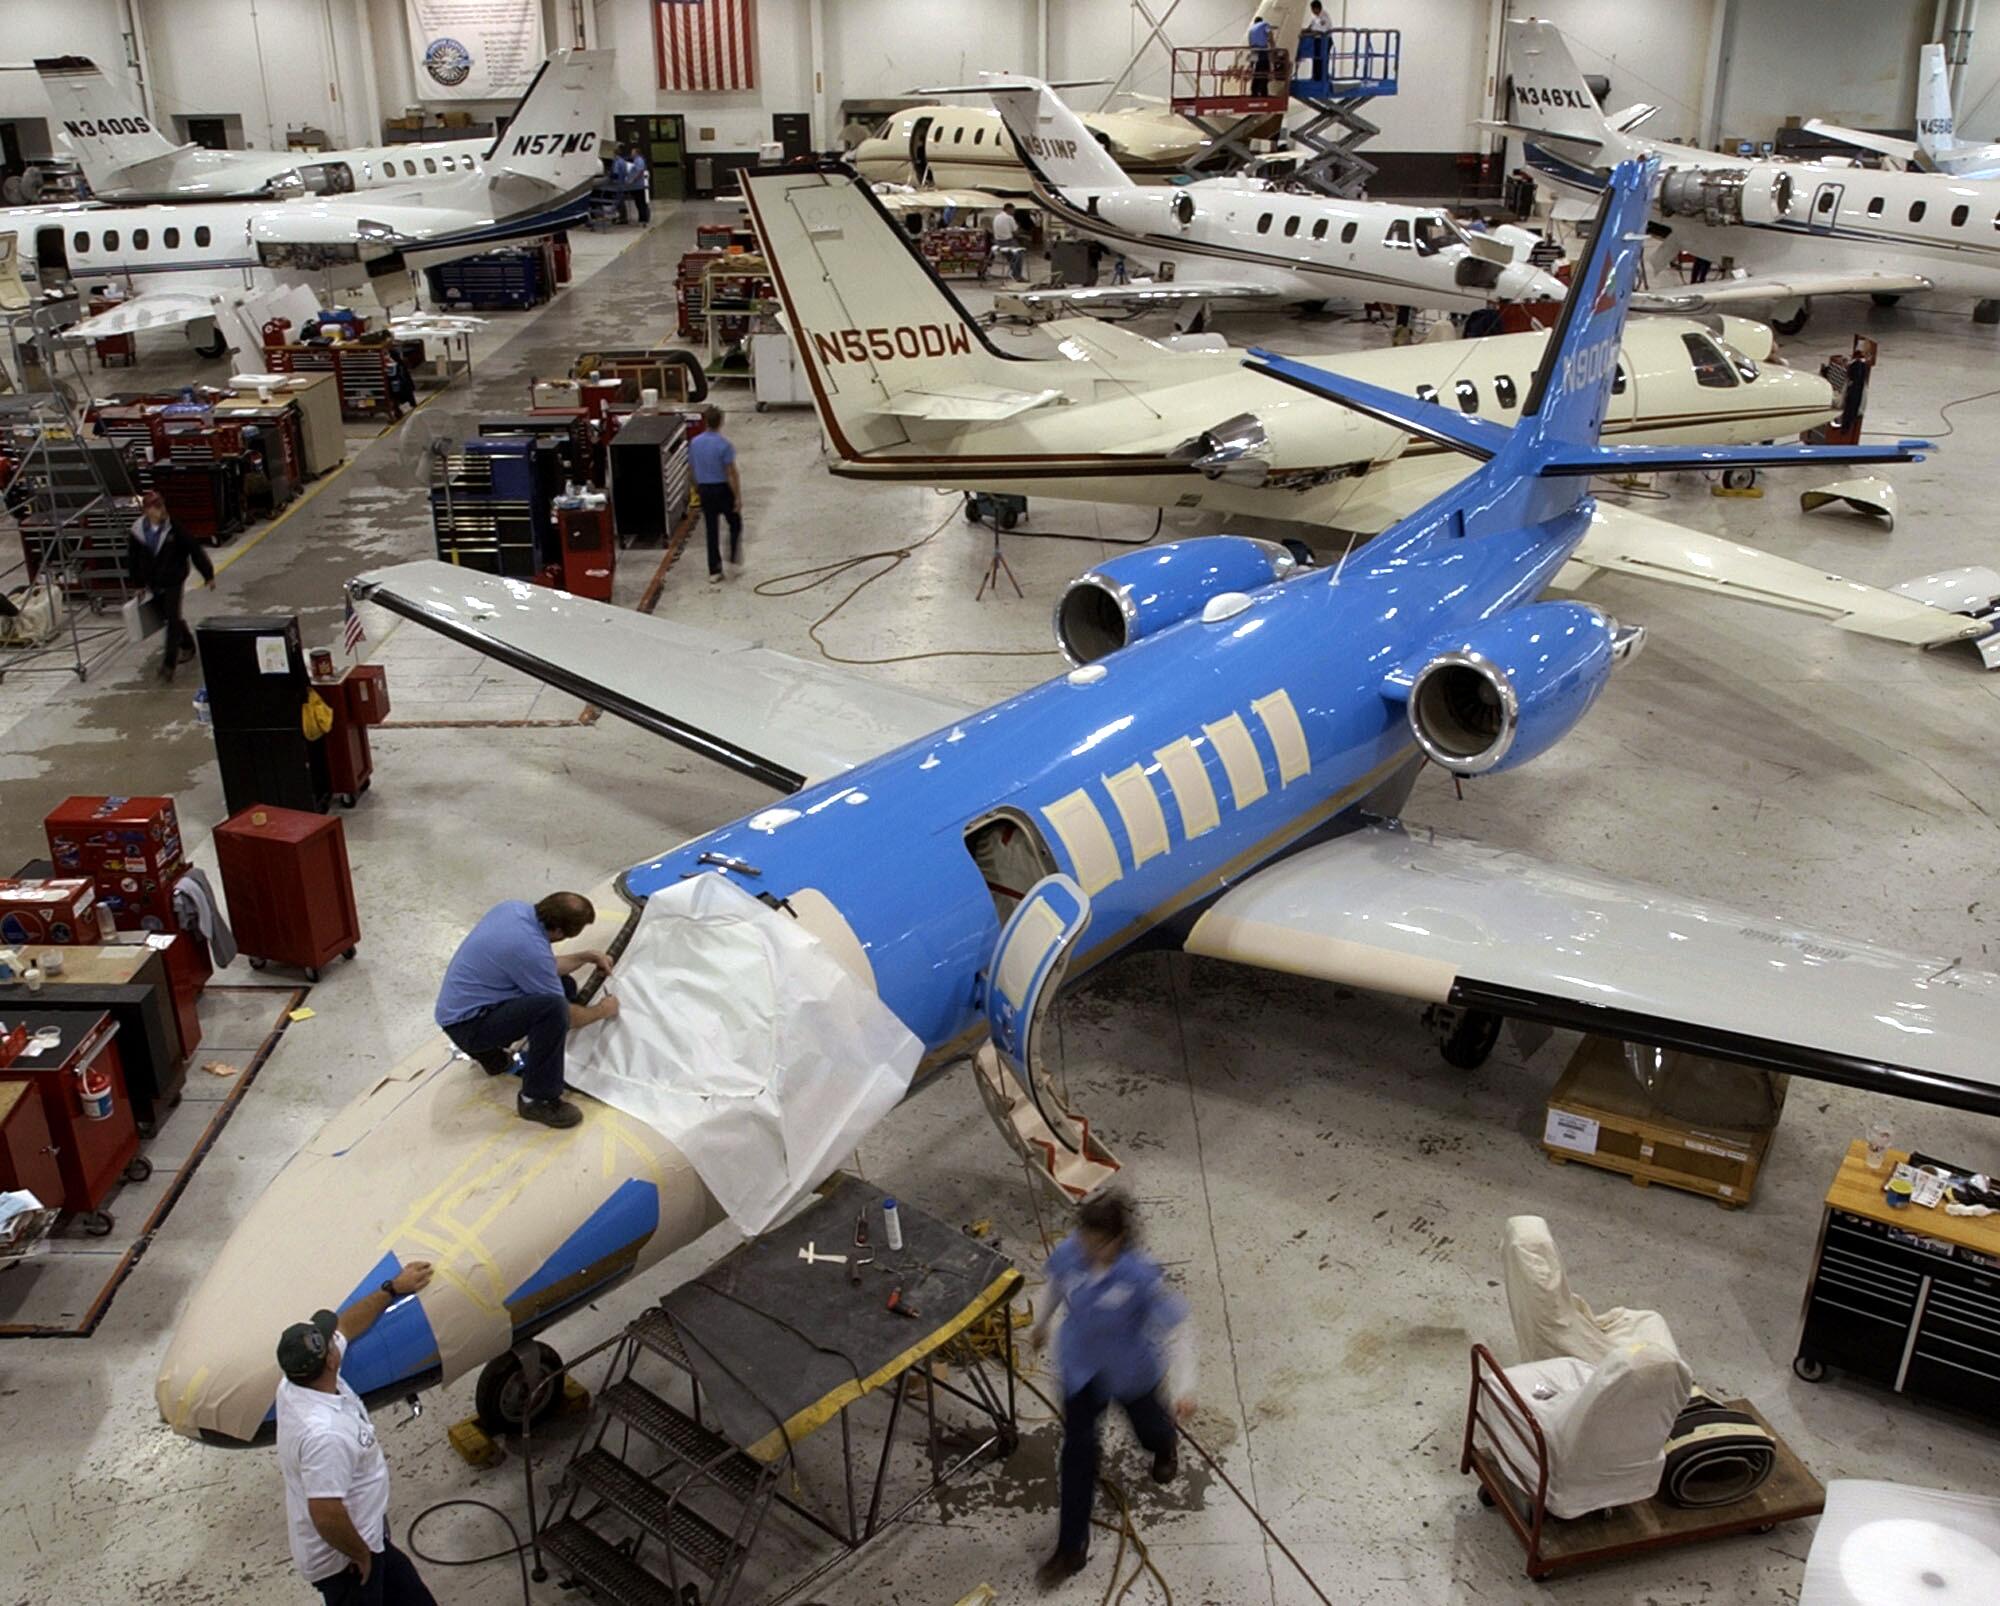 Workers service Cessna Citation business jets at Cessna's service center in Wichita, Kansas.